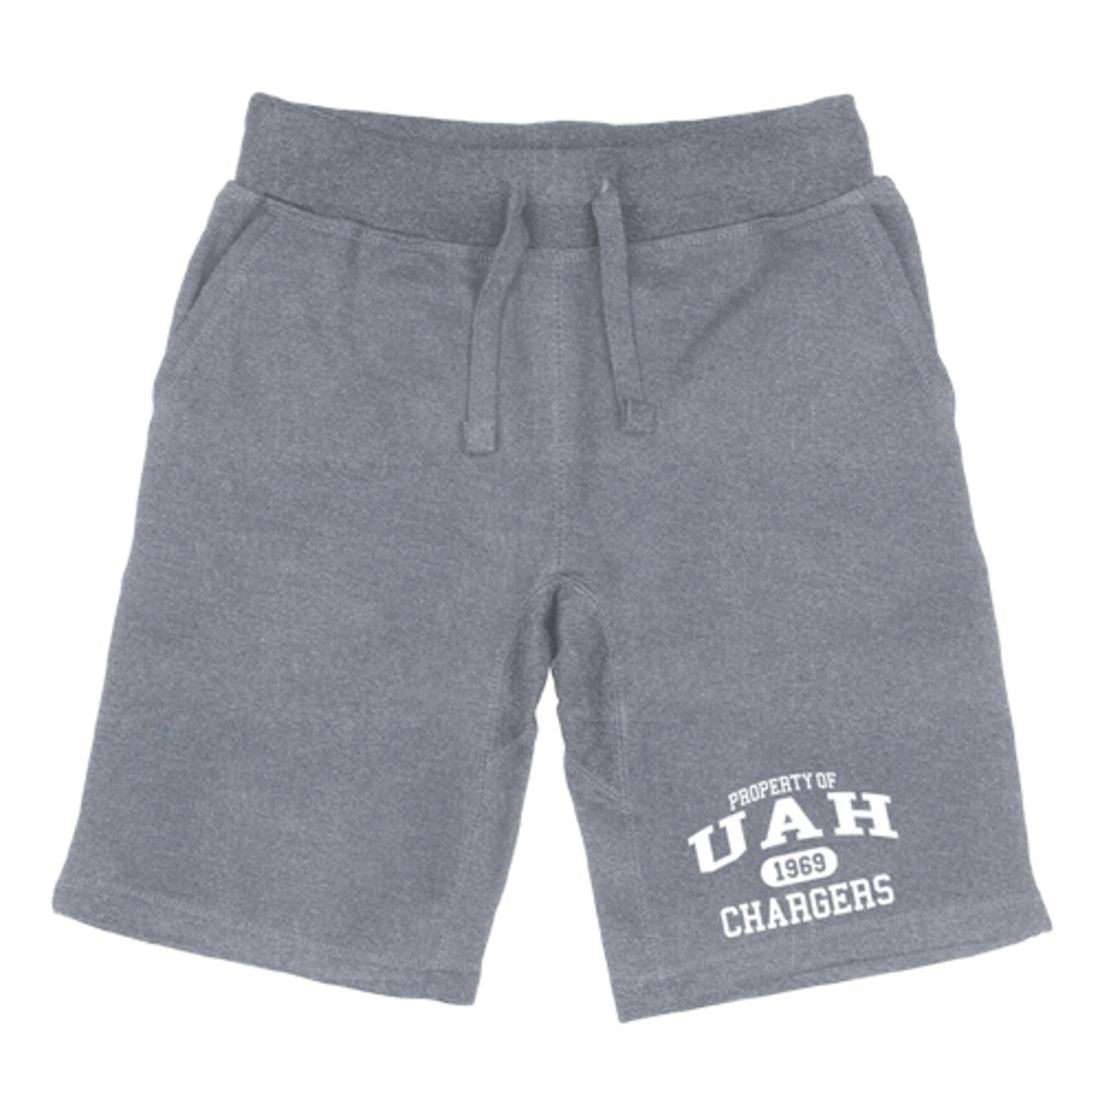 The University of Alabama in Huntsville Chargers Property Shorts Fleece Drawstring